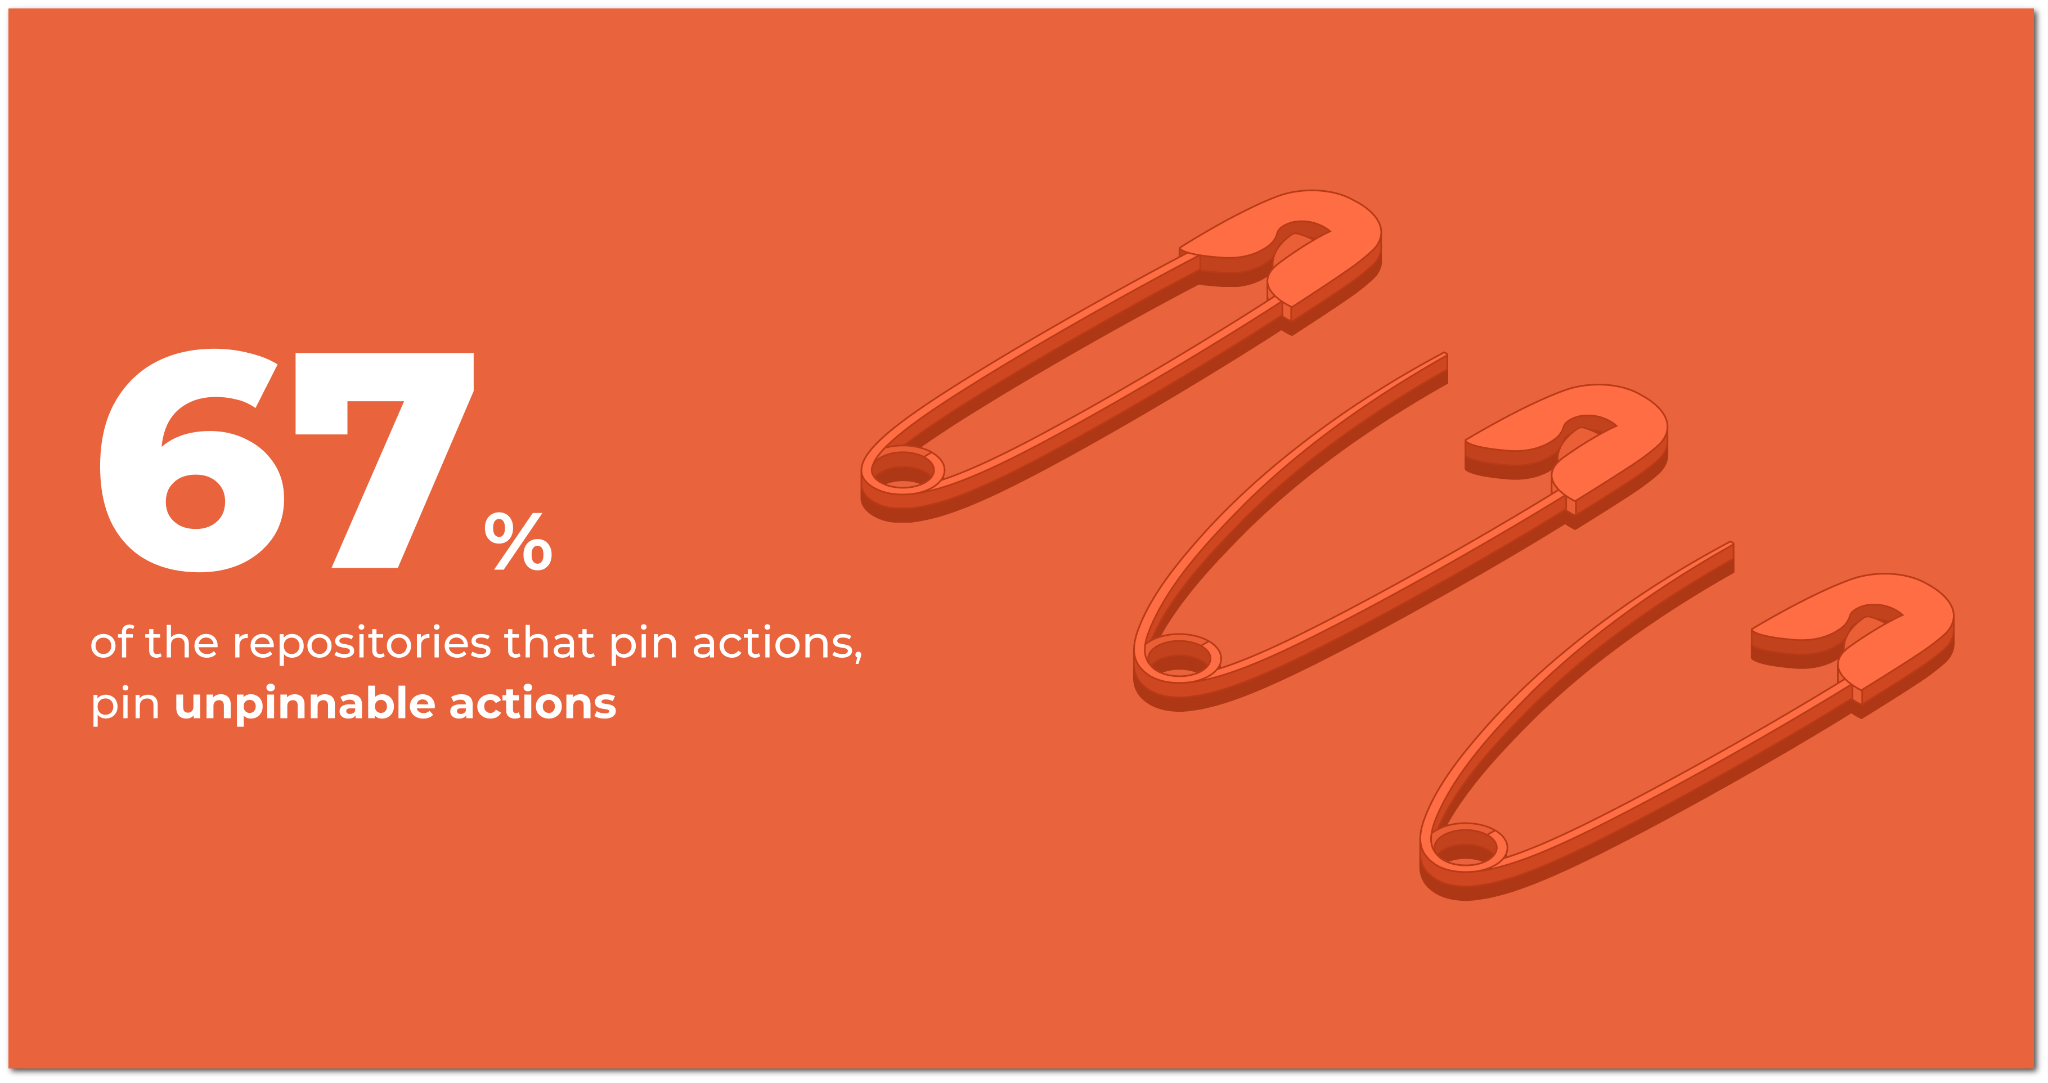 67% of open-source projects pin unpinnable actions.